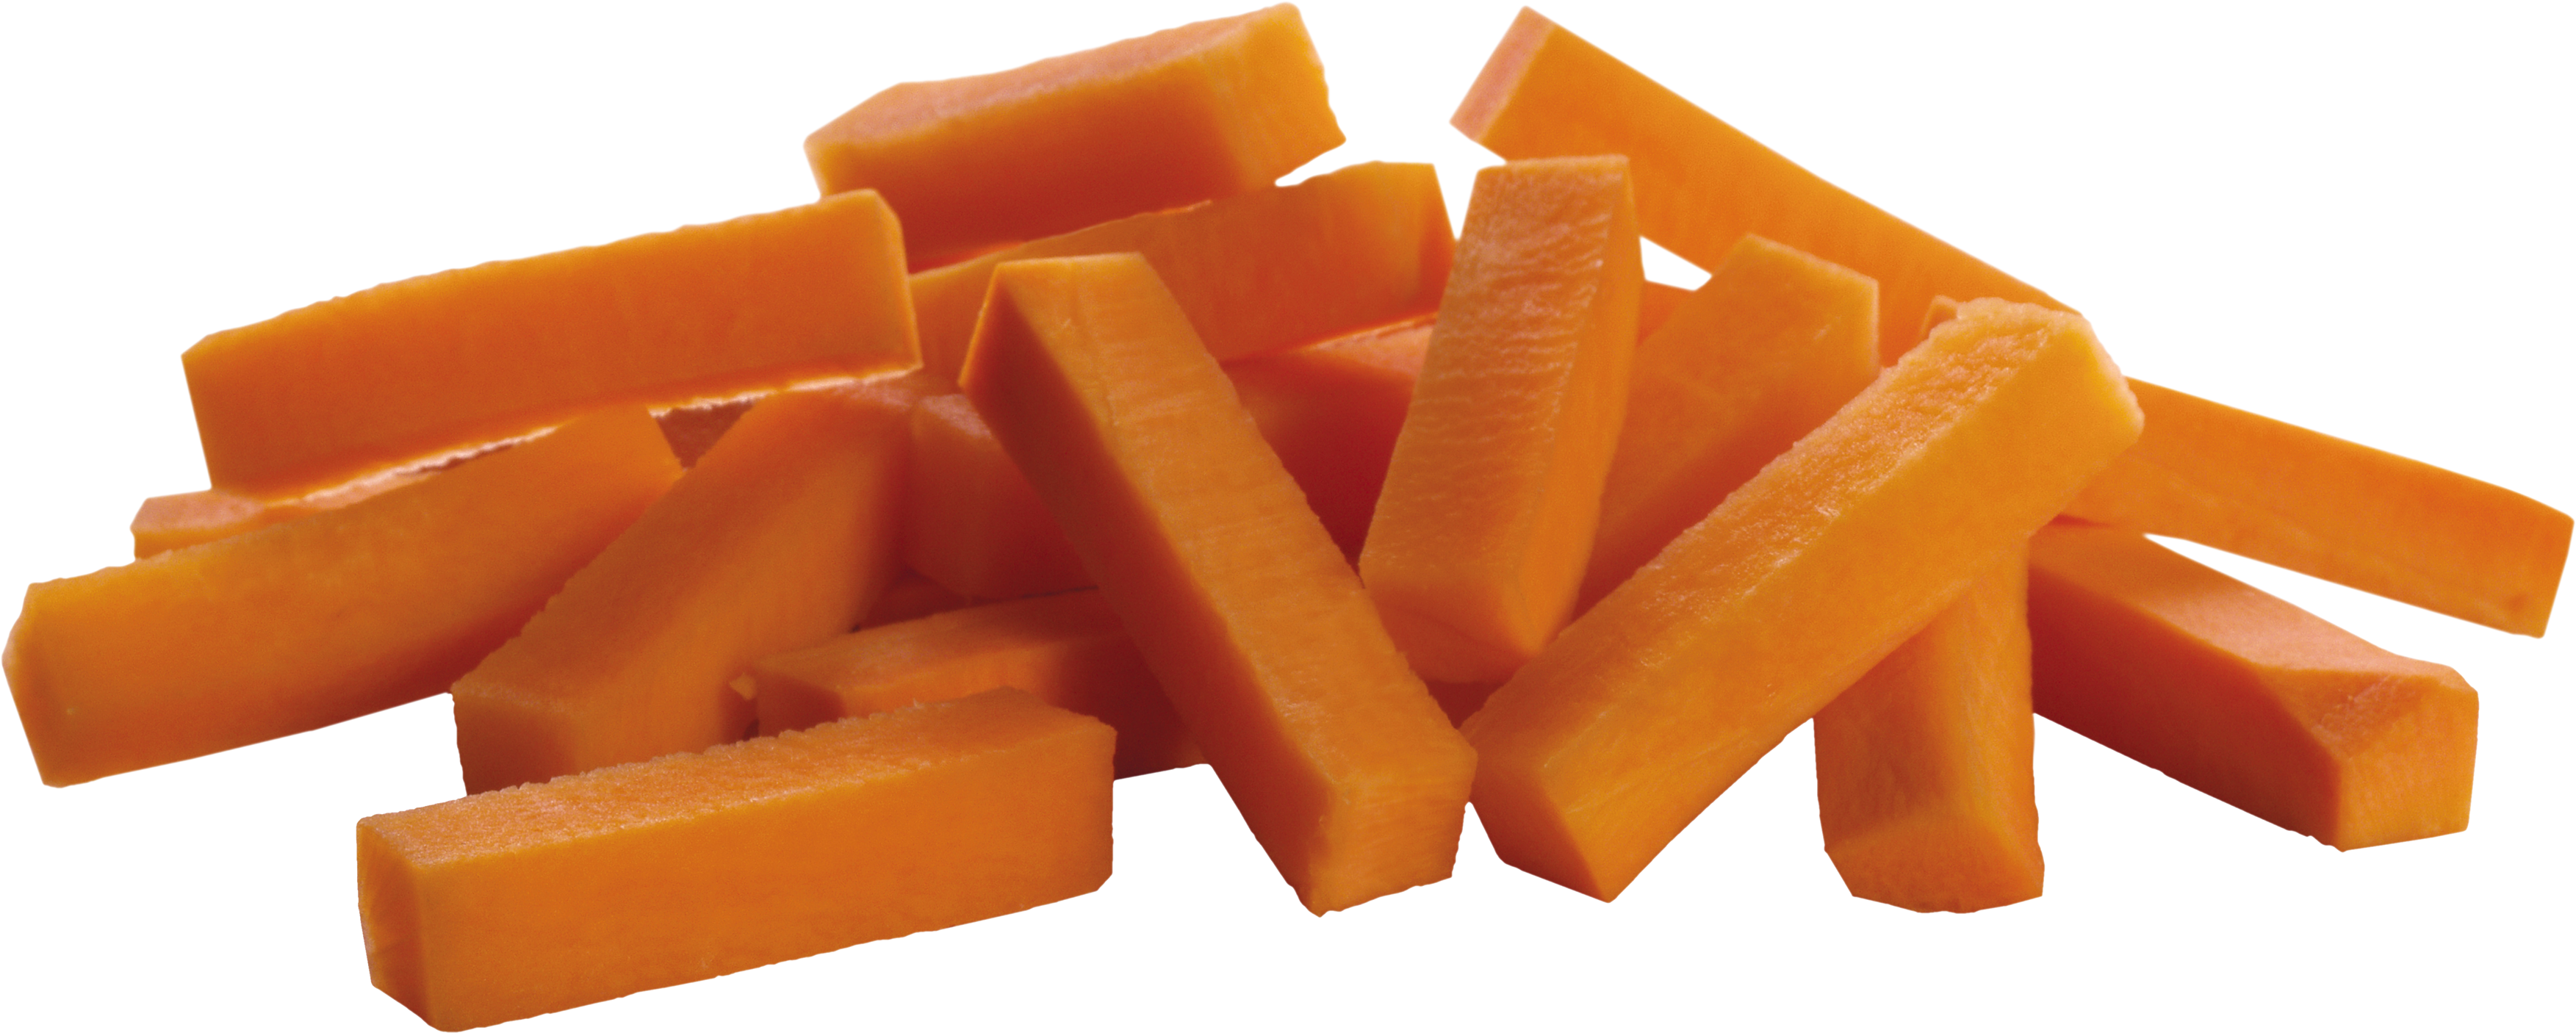 Slice Carrot Slices HQ Image Free PNG Image